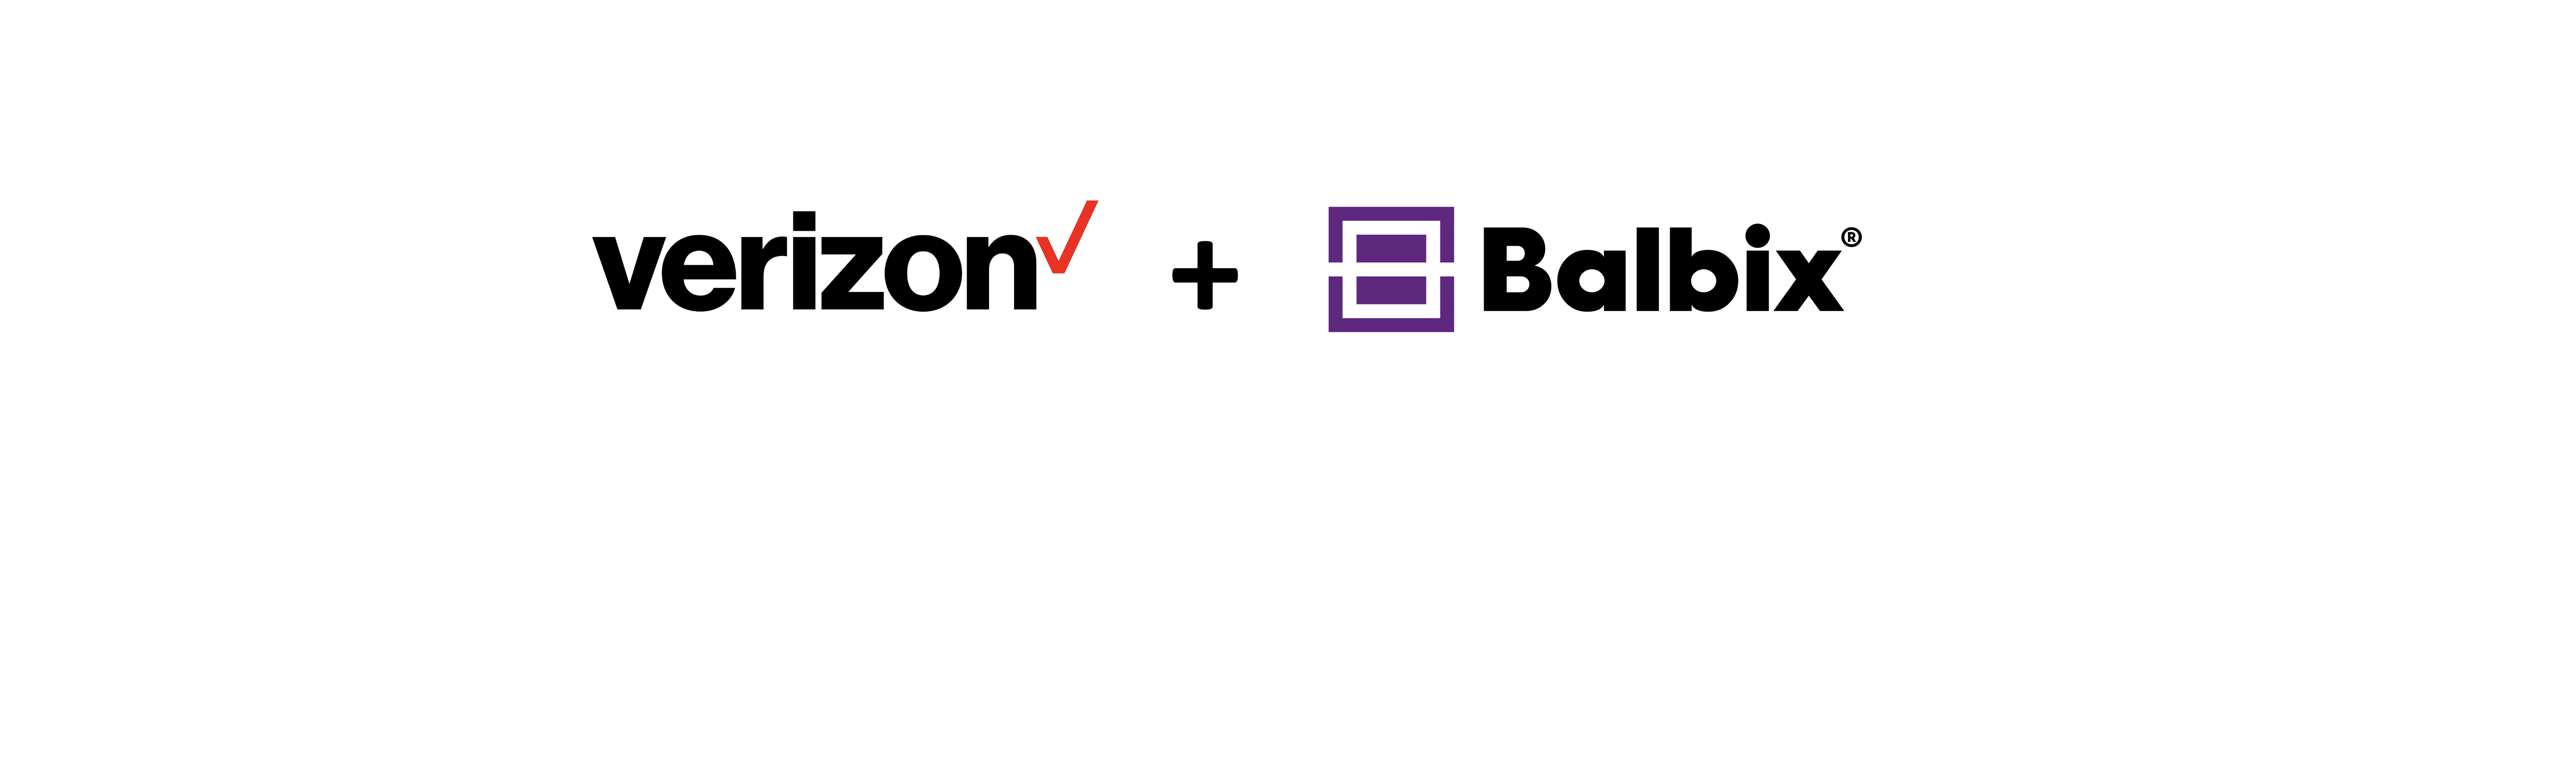 Announcing our partnership with Verizon Consulting Services